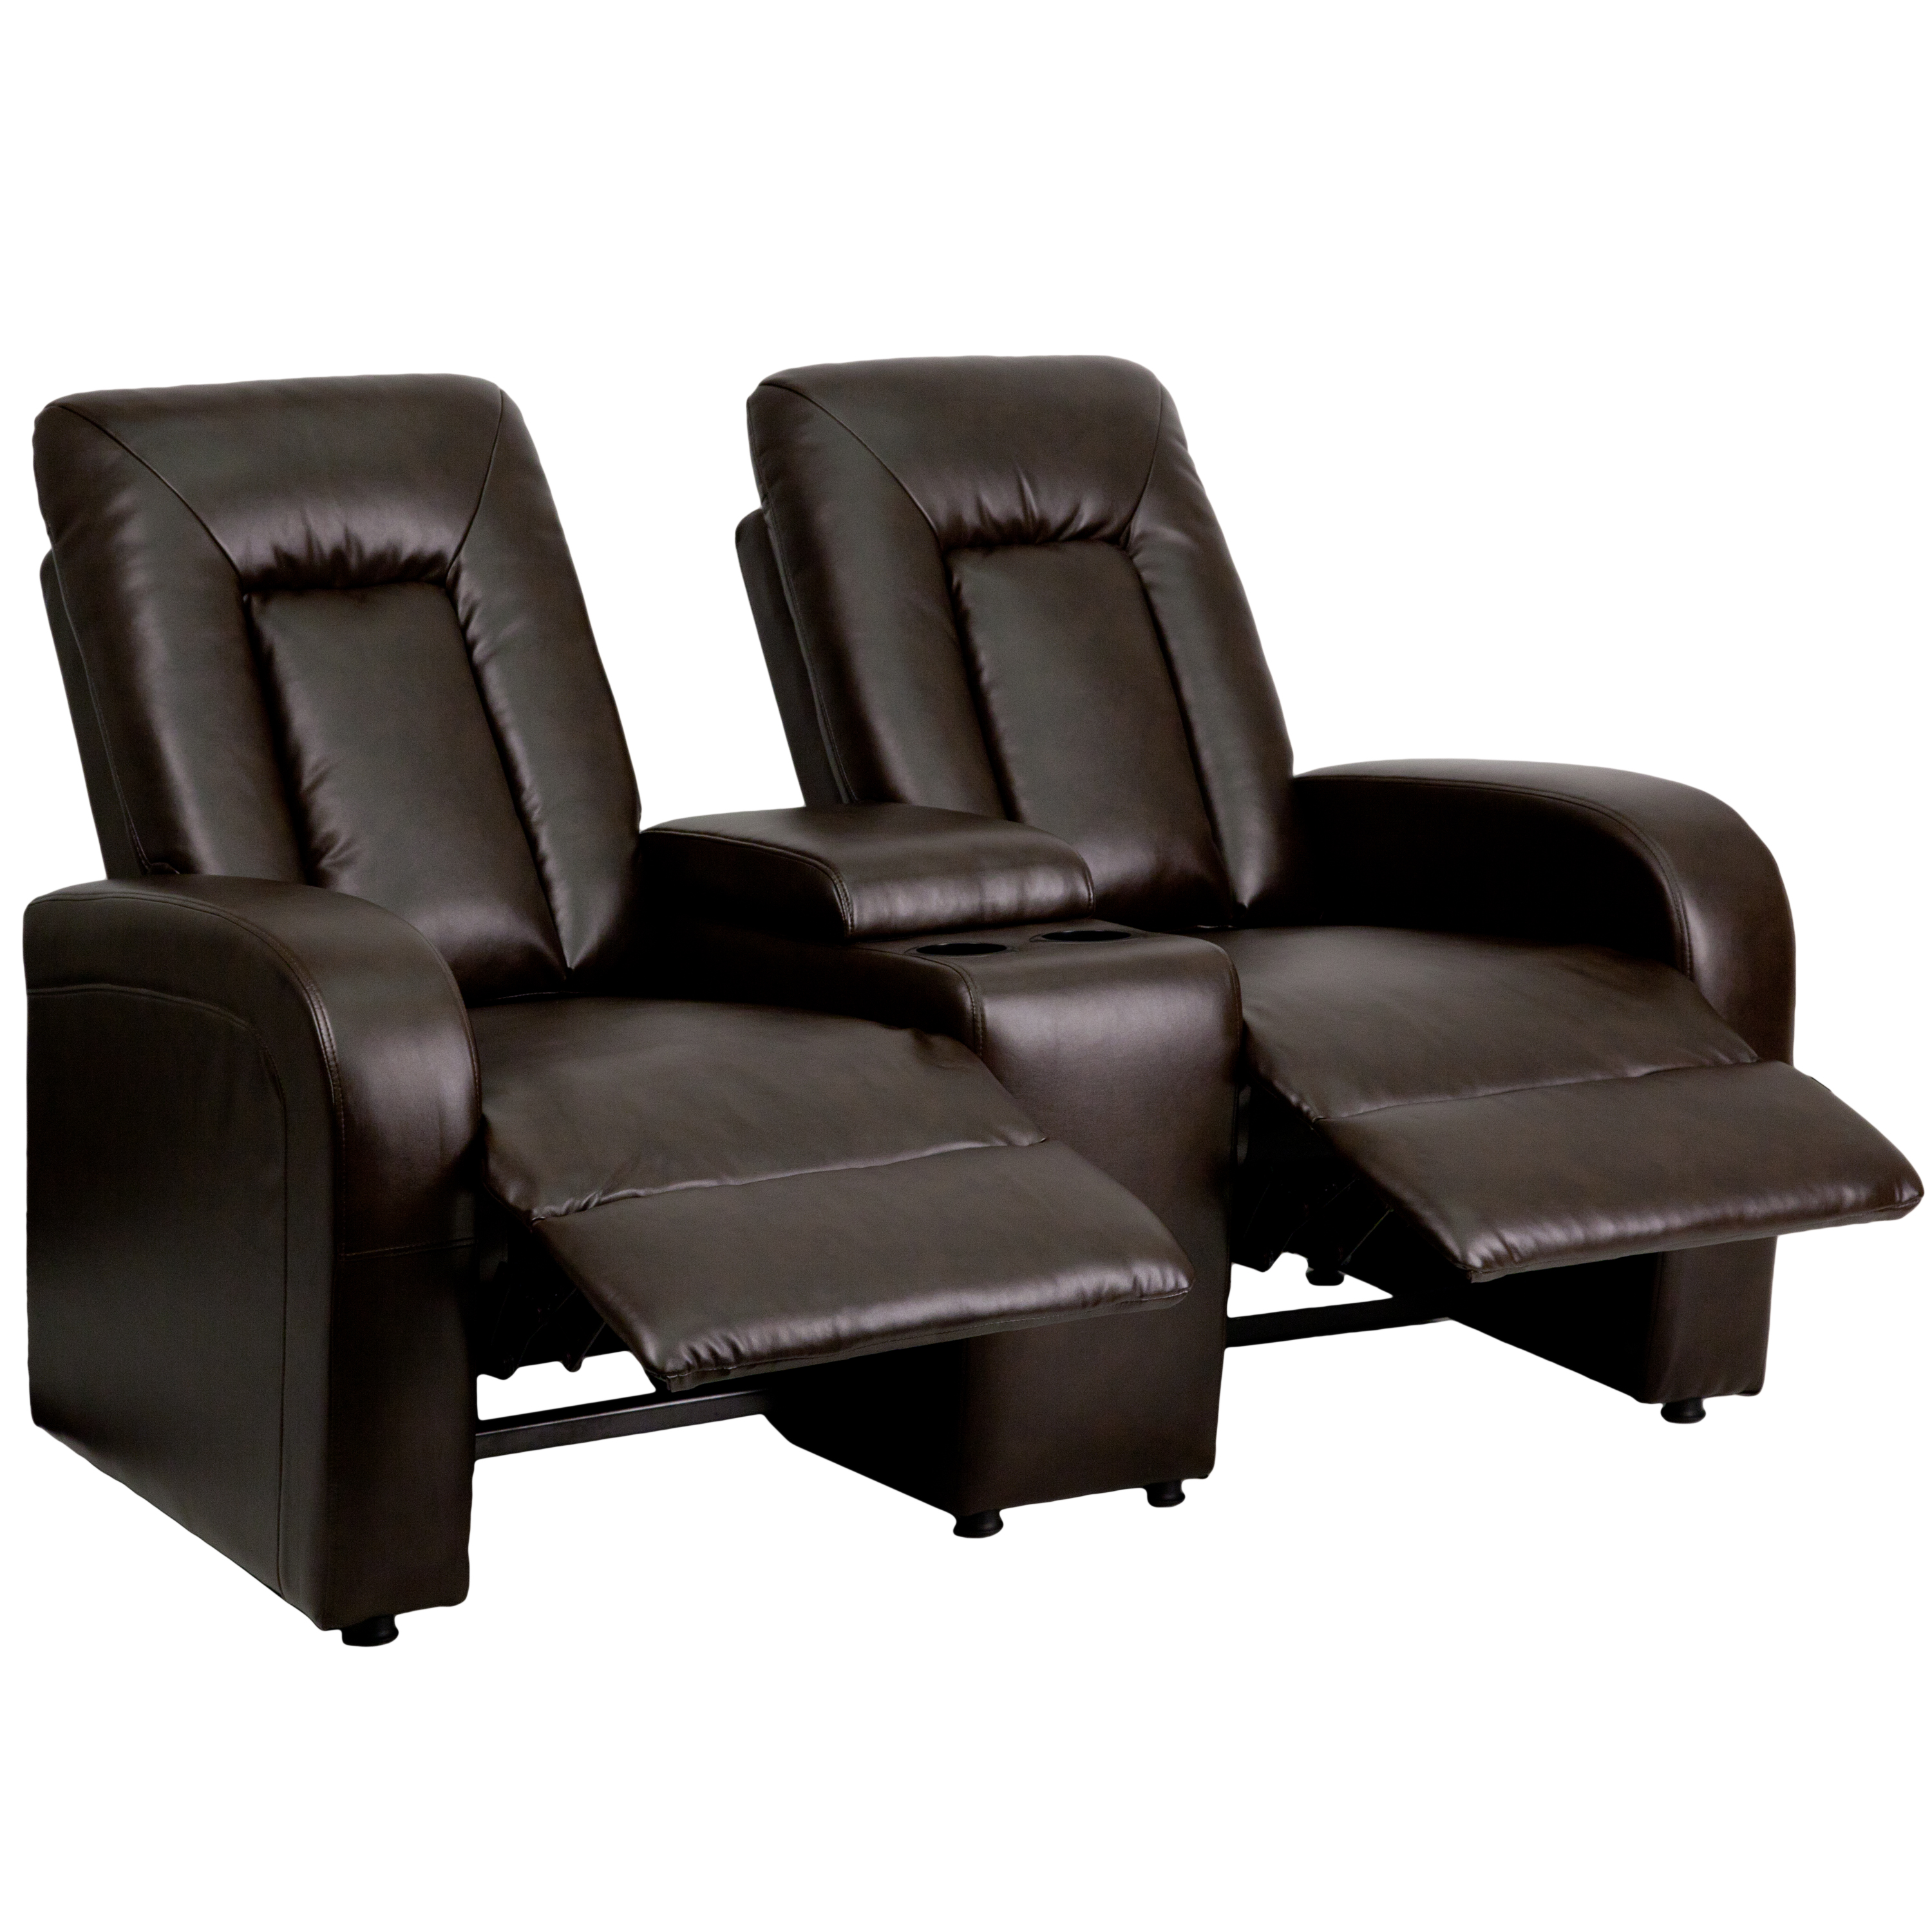 Flash Furniture BT-70259-2-BRN-GG 2-Seat Reclining Brown LeatherSoft Theater Seating Unit with Cup Holders